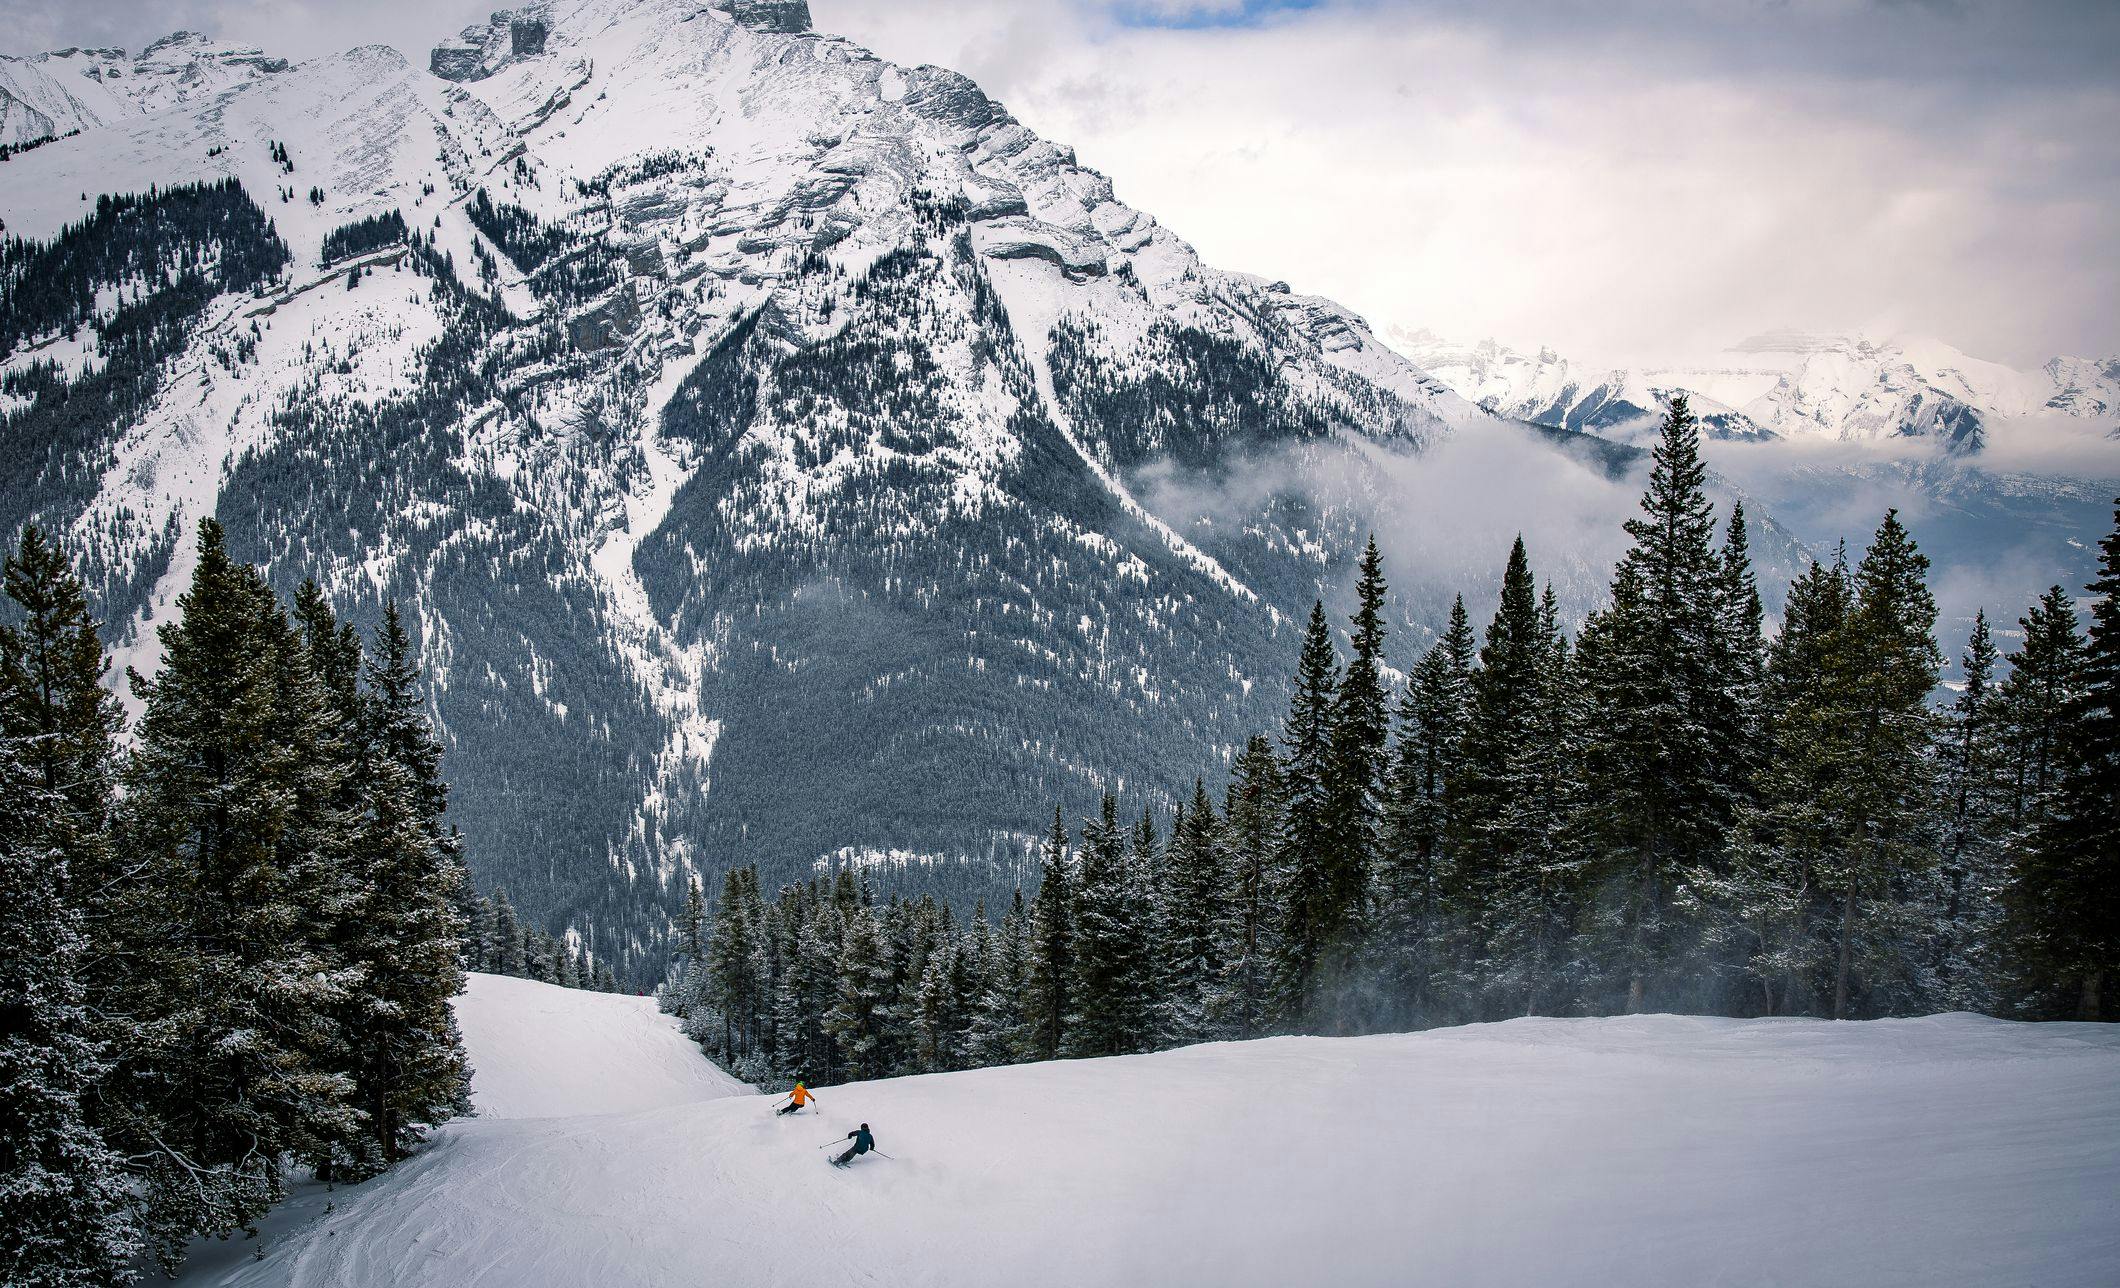 Skiers on Mt. Norquay in Banff National Park.